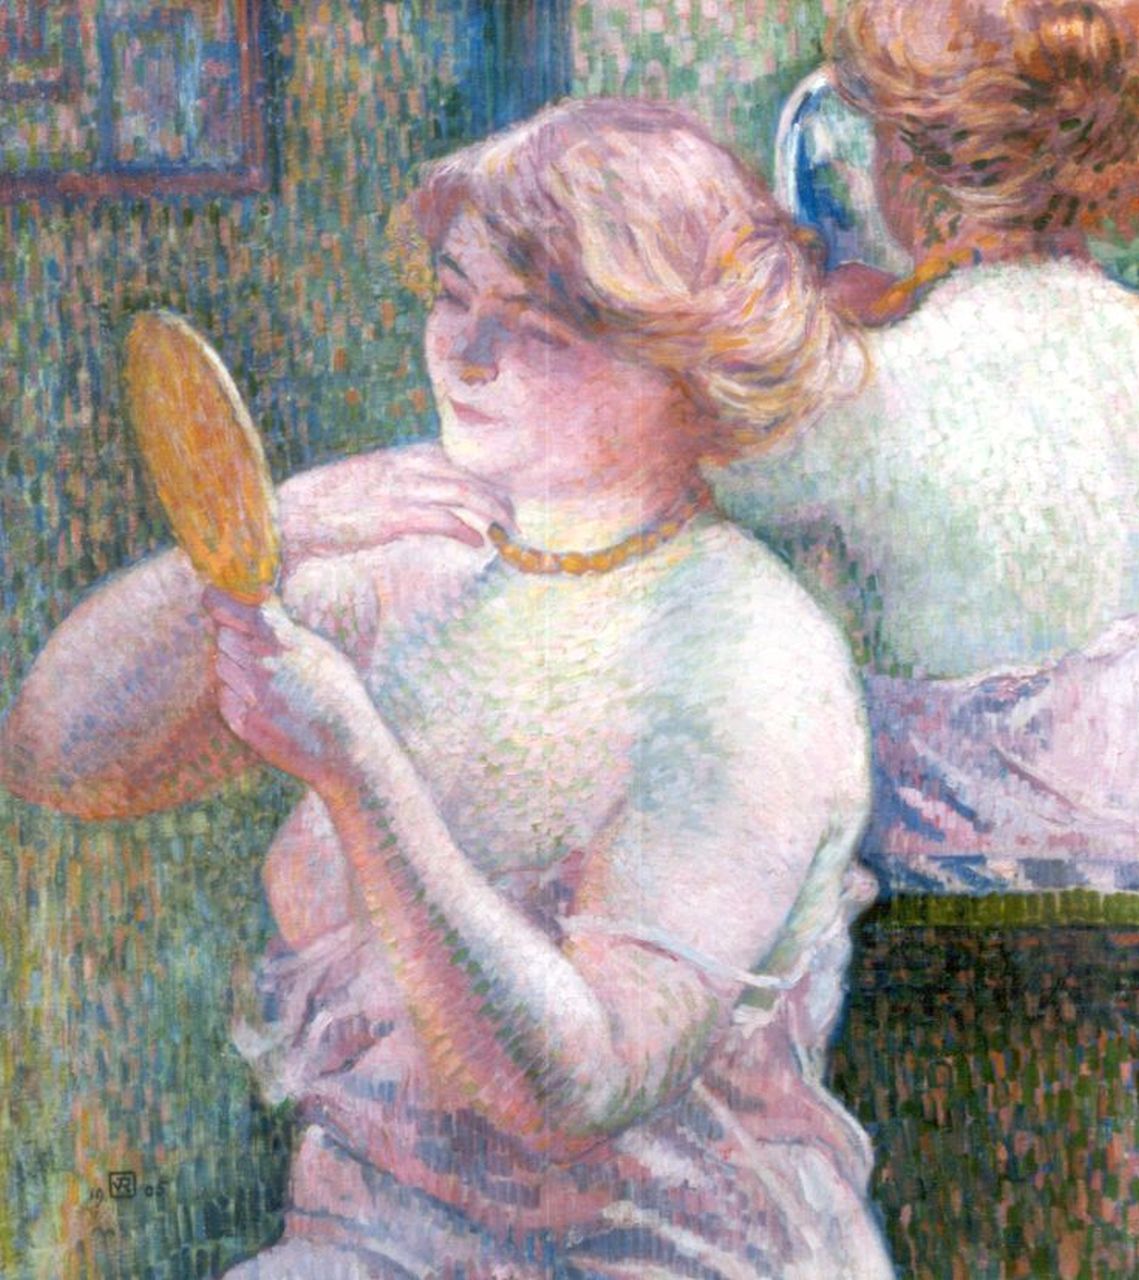 Rysselberghe Th. van | Théodore 'Théo' van Rysselberghe, Femme devant une glace, oil on canvas 72.8 x 60.0 cm, signed l.l. with monogram and dated 1905